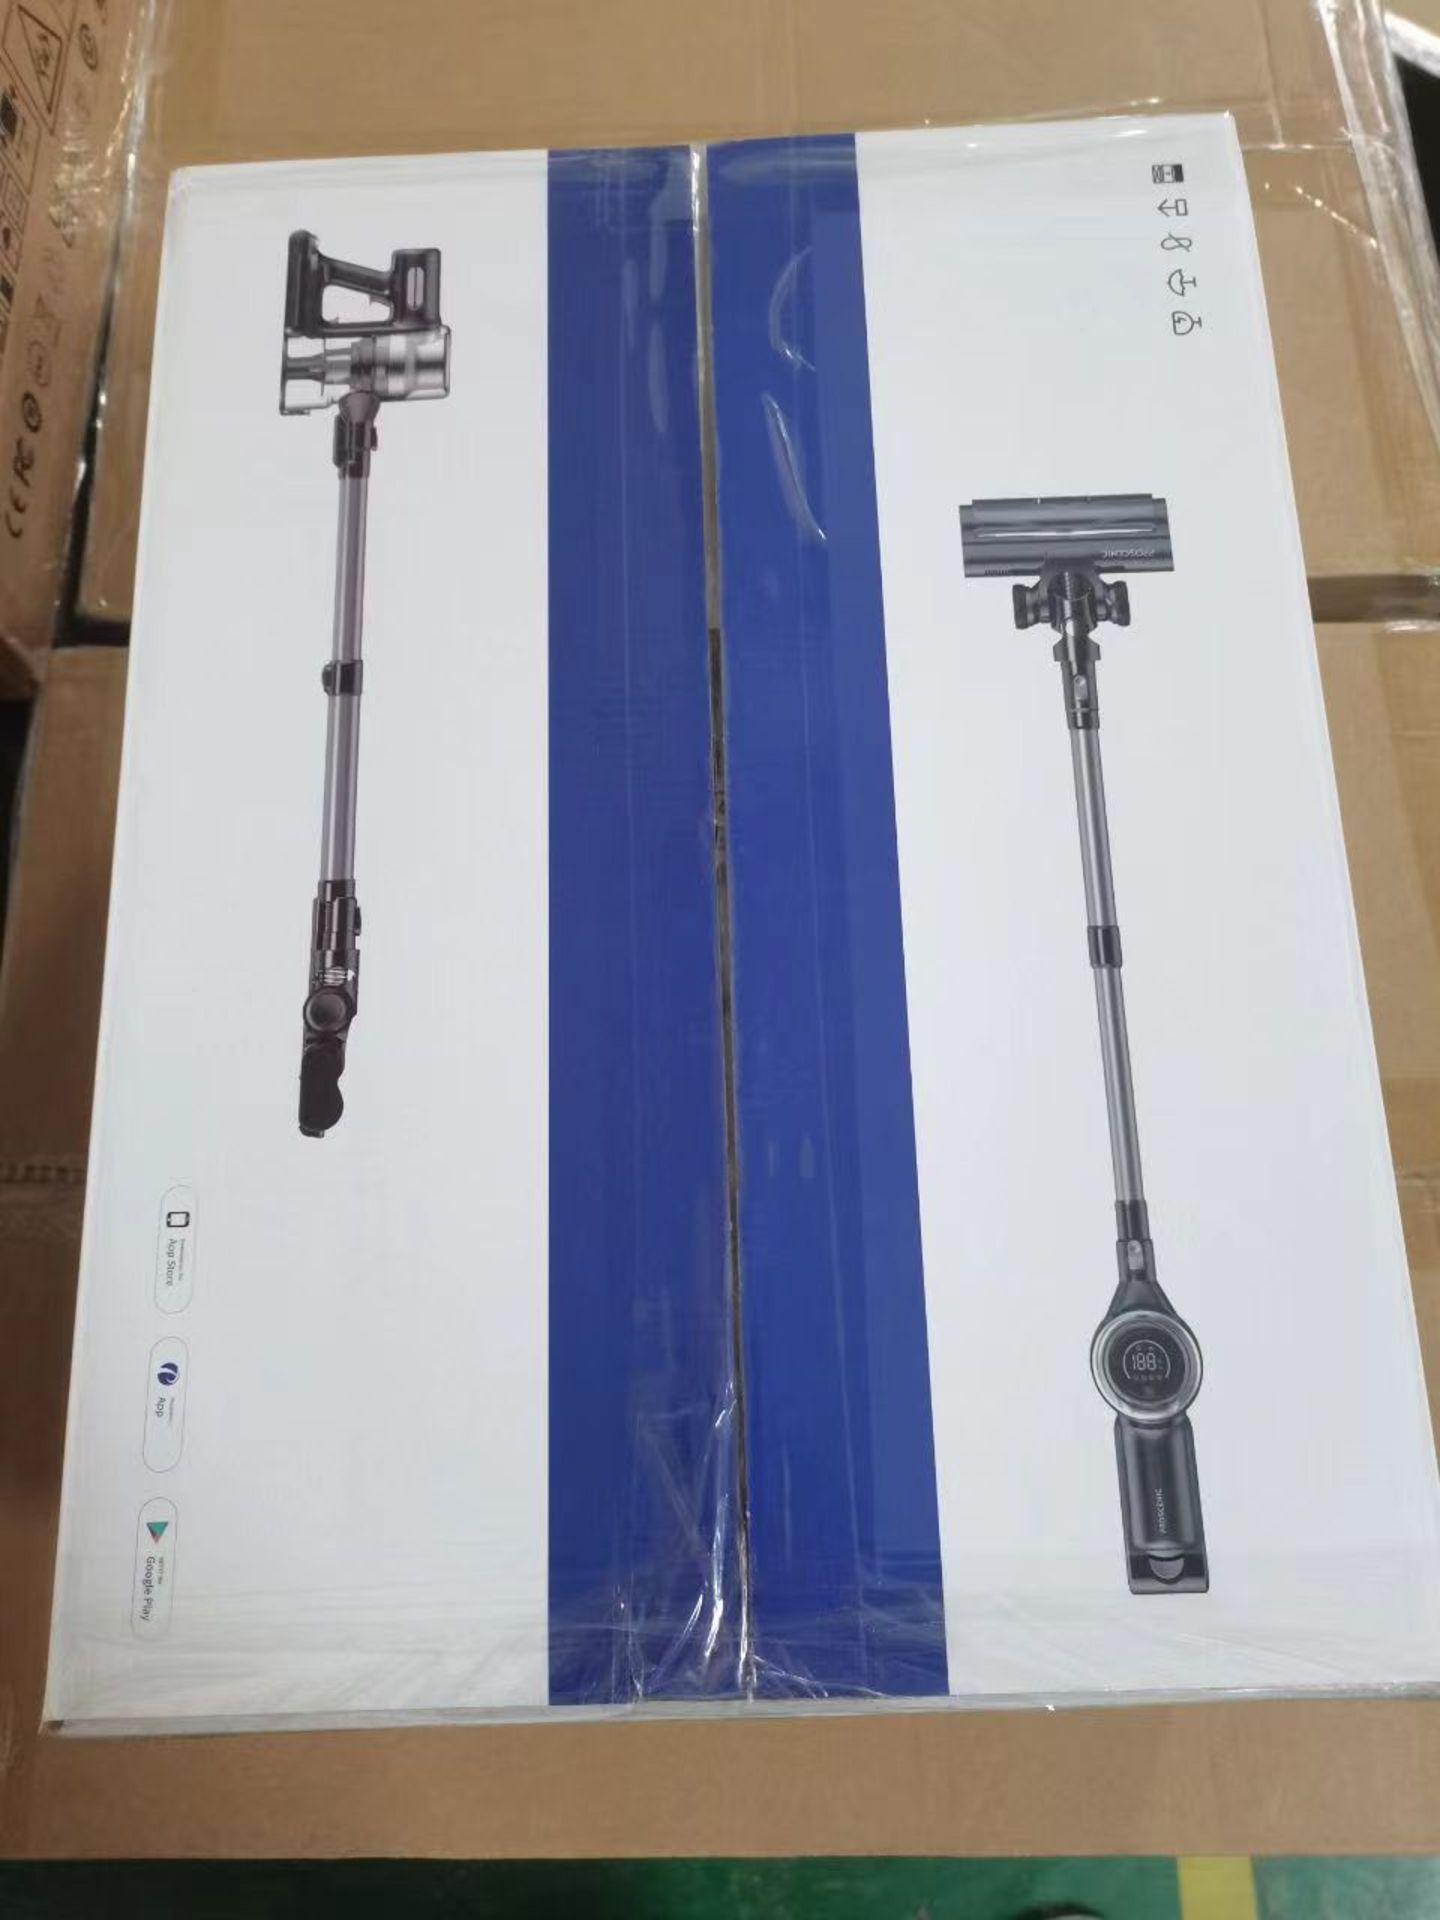 TRADE LOT 4 x New & Boxed Proscenic P12 Cordless Vacuum Cleaner, 33Kpa Stick Vacuum Cleaner with - Image 6 of 11